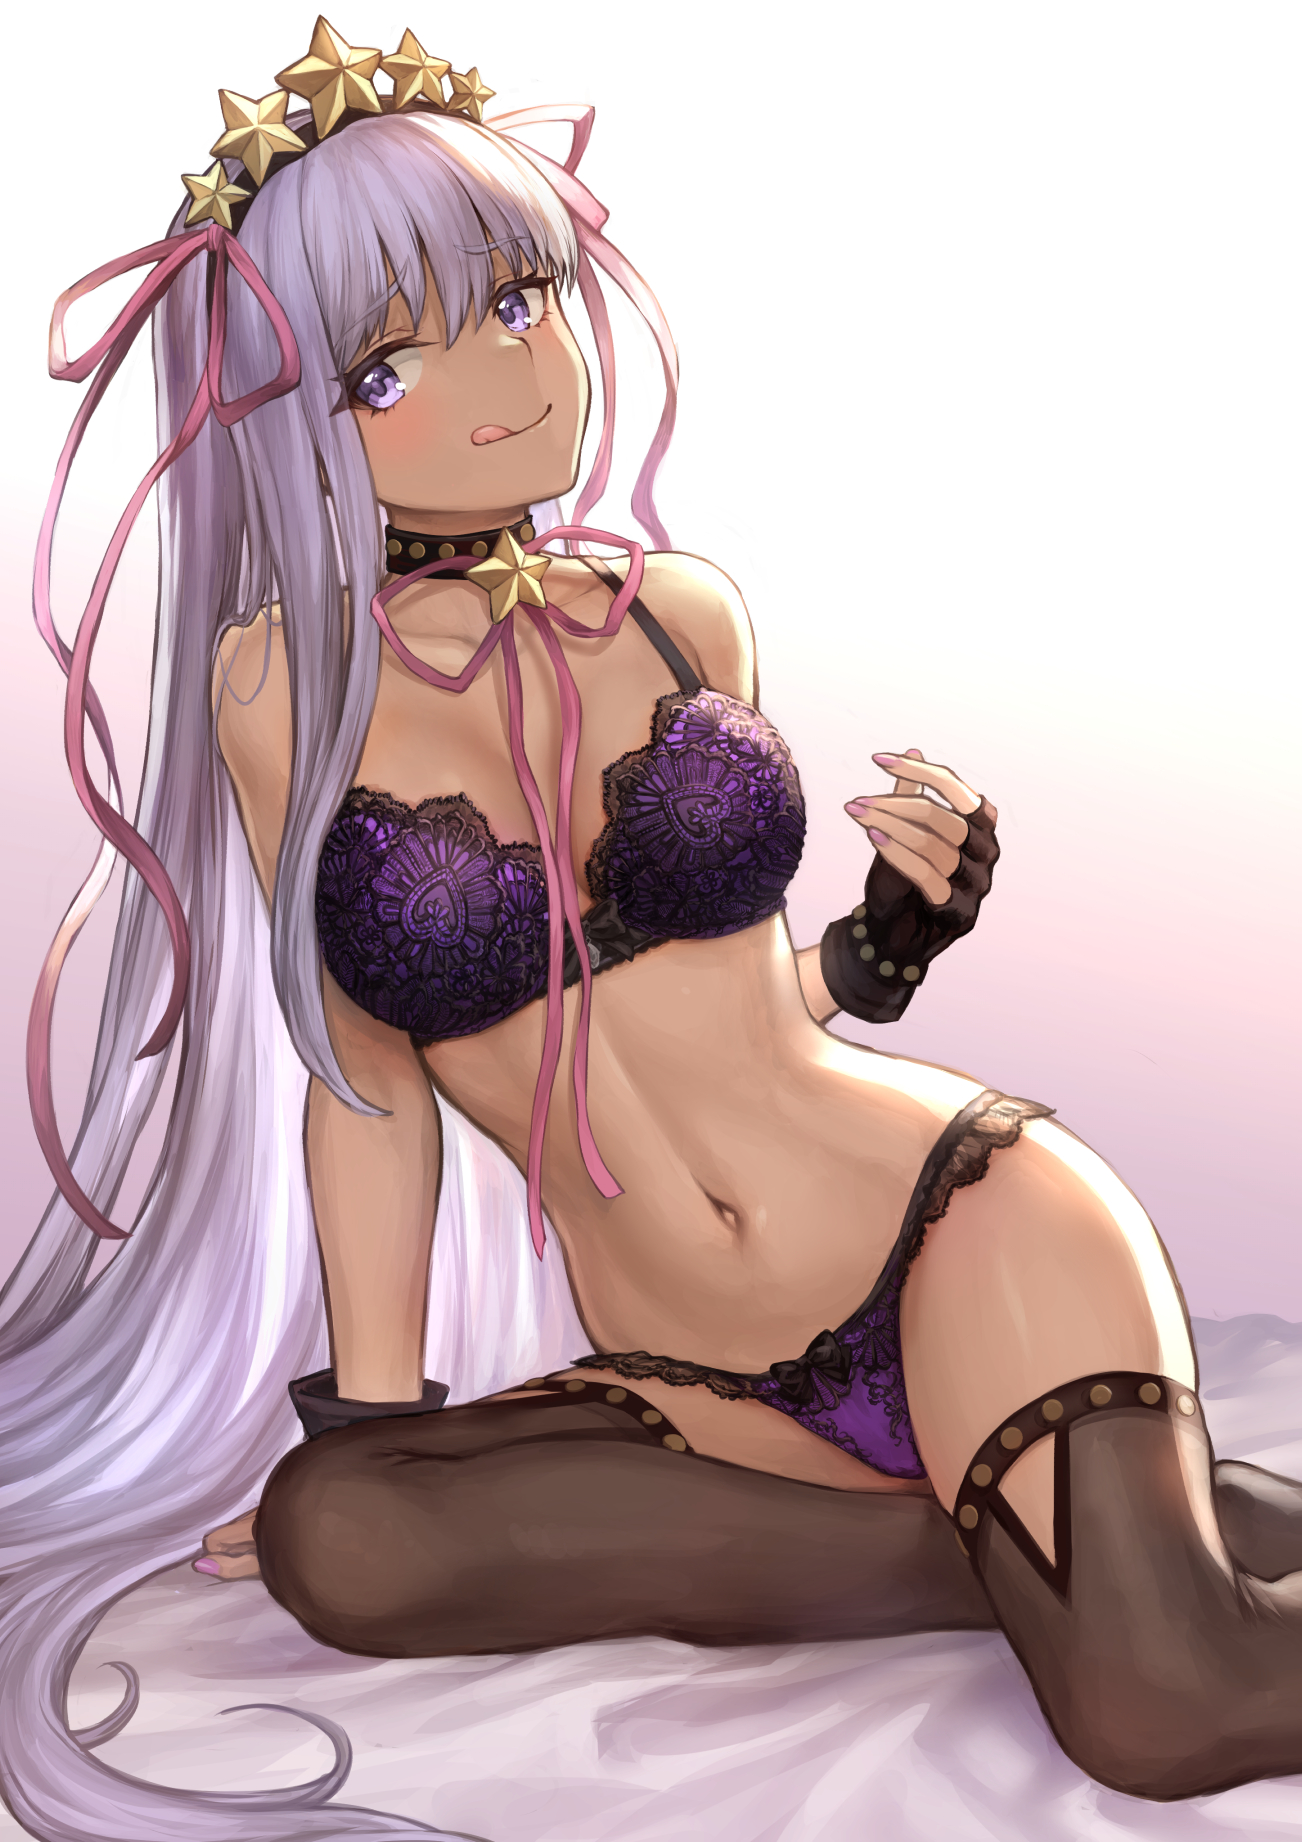 Anime 1302x1842 anime anime girls digital art artwork portrait display 2D Mashu 003 Fate series Fate/Grand Order BB (Fate/Extra CCC ) purple eyes purple hair long hair tongue out tanned thigh-highs lingerie